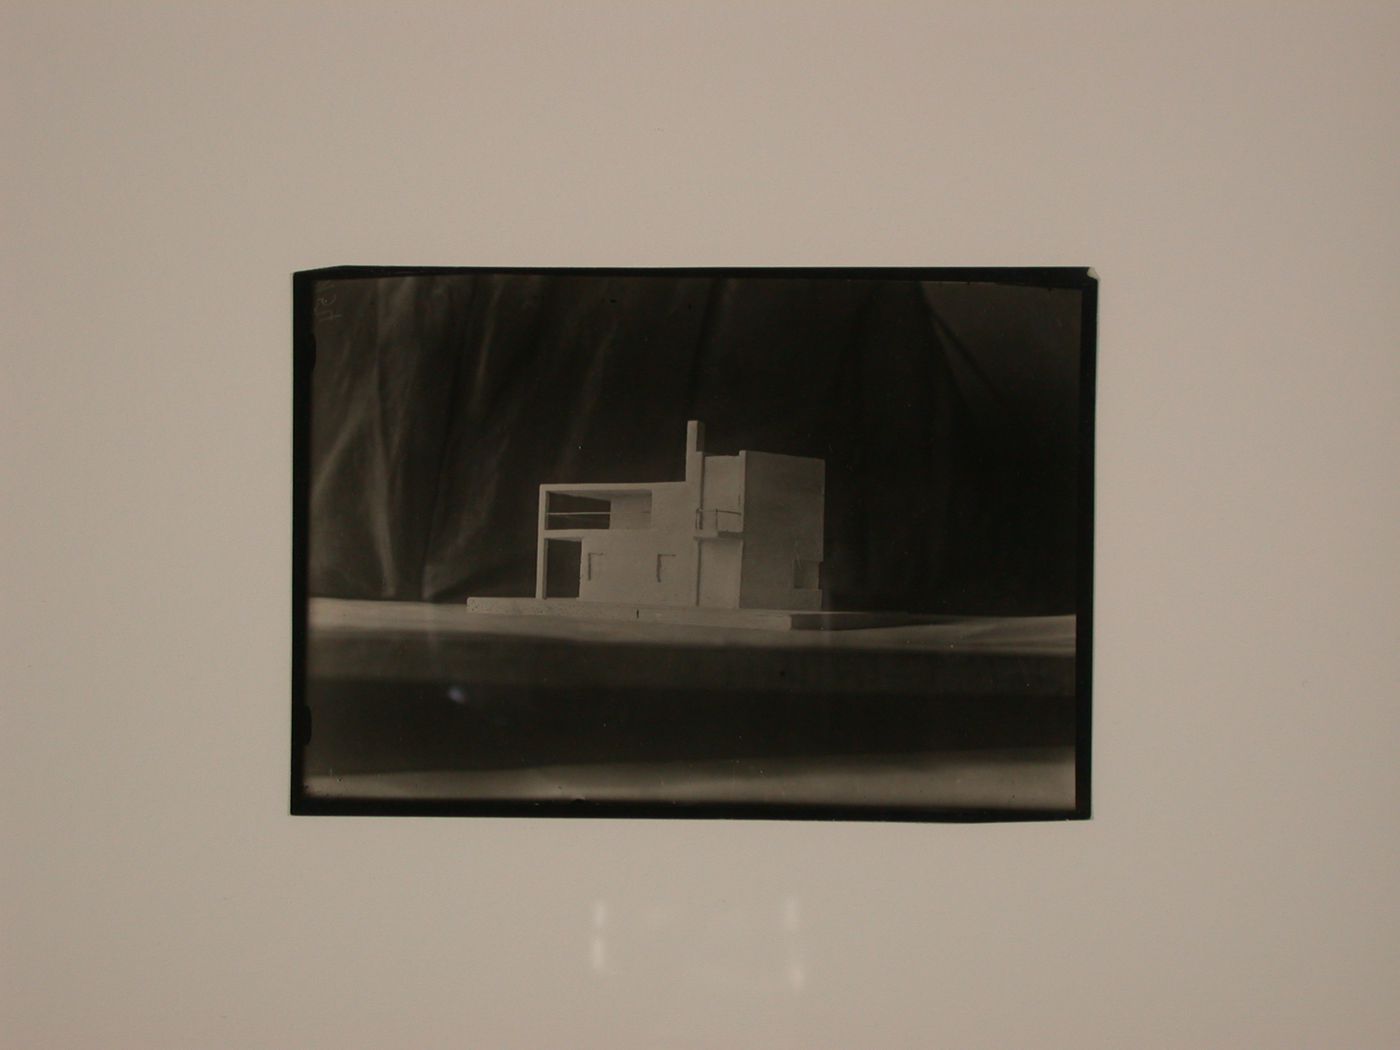 Photographs of the model of an unidentified building